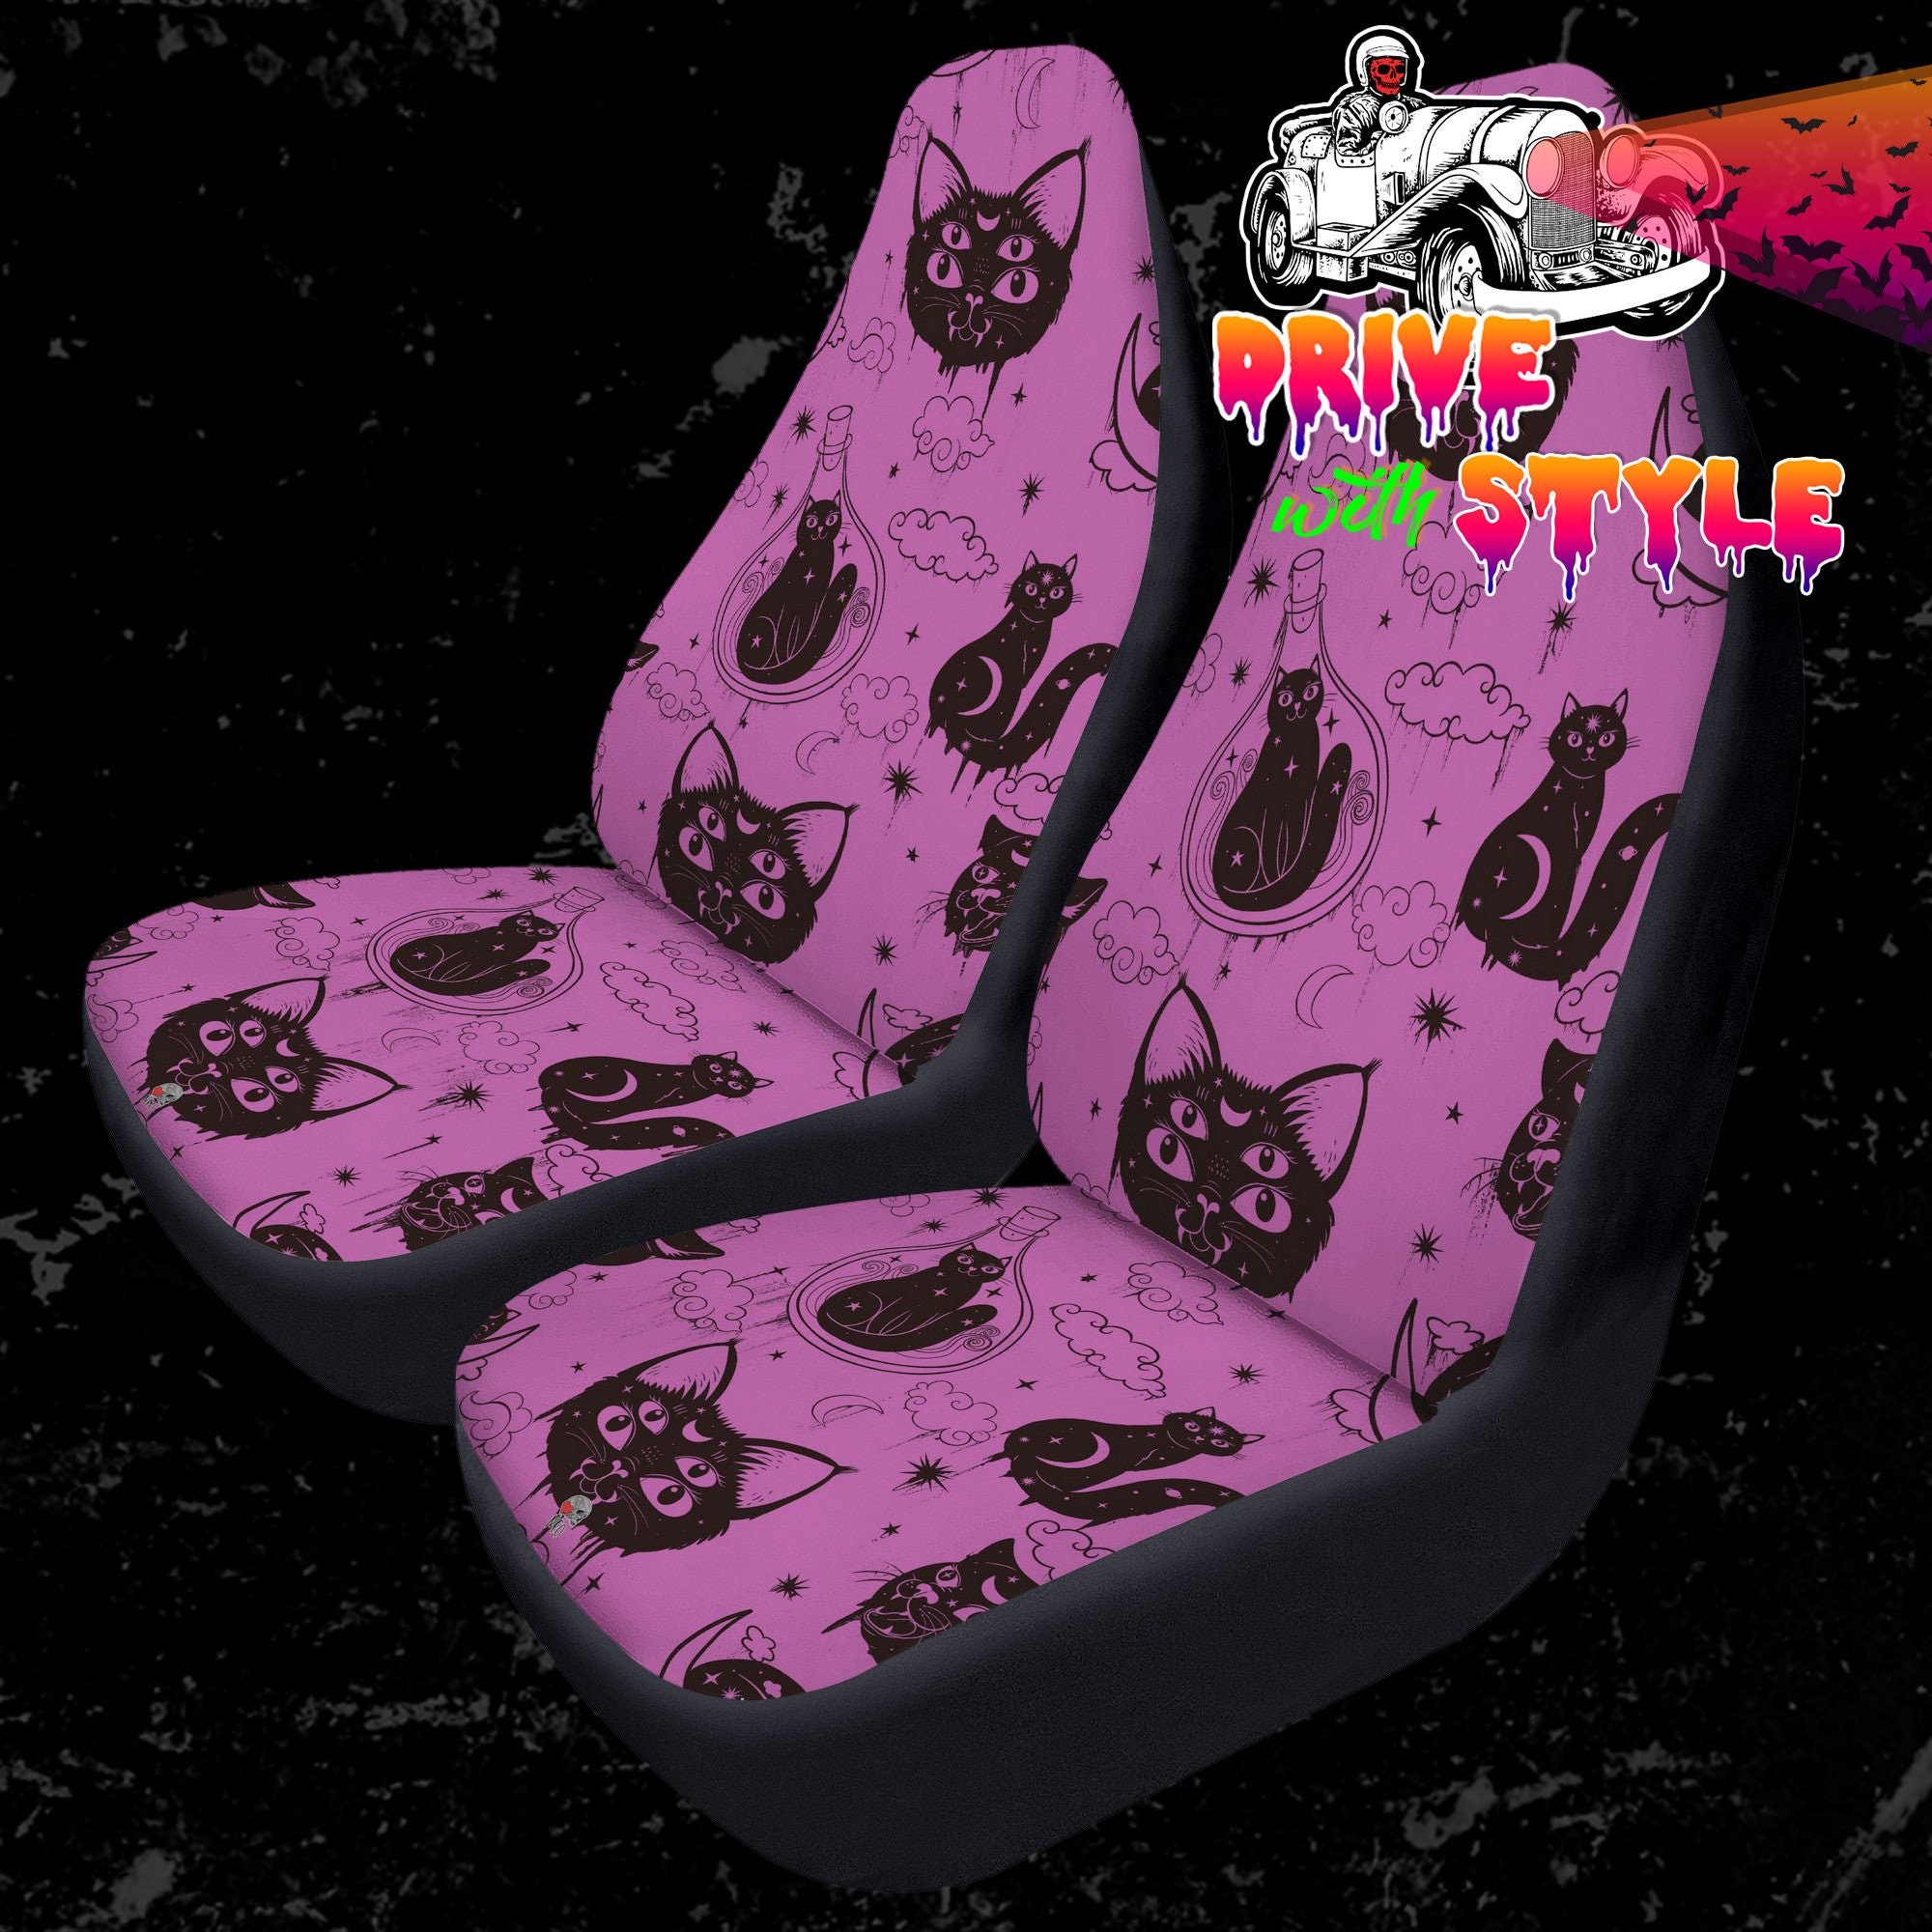 Purr Evil Pastel Goth Car Seats Covers, Grunge Gothic Car Seats Protector,  Halloween Vamp Car Accessories, Bat Swarm Witchy Halloween 